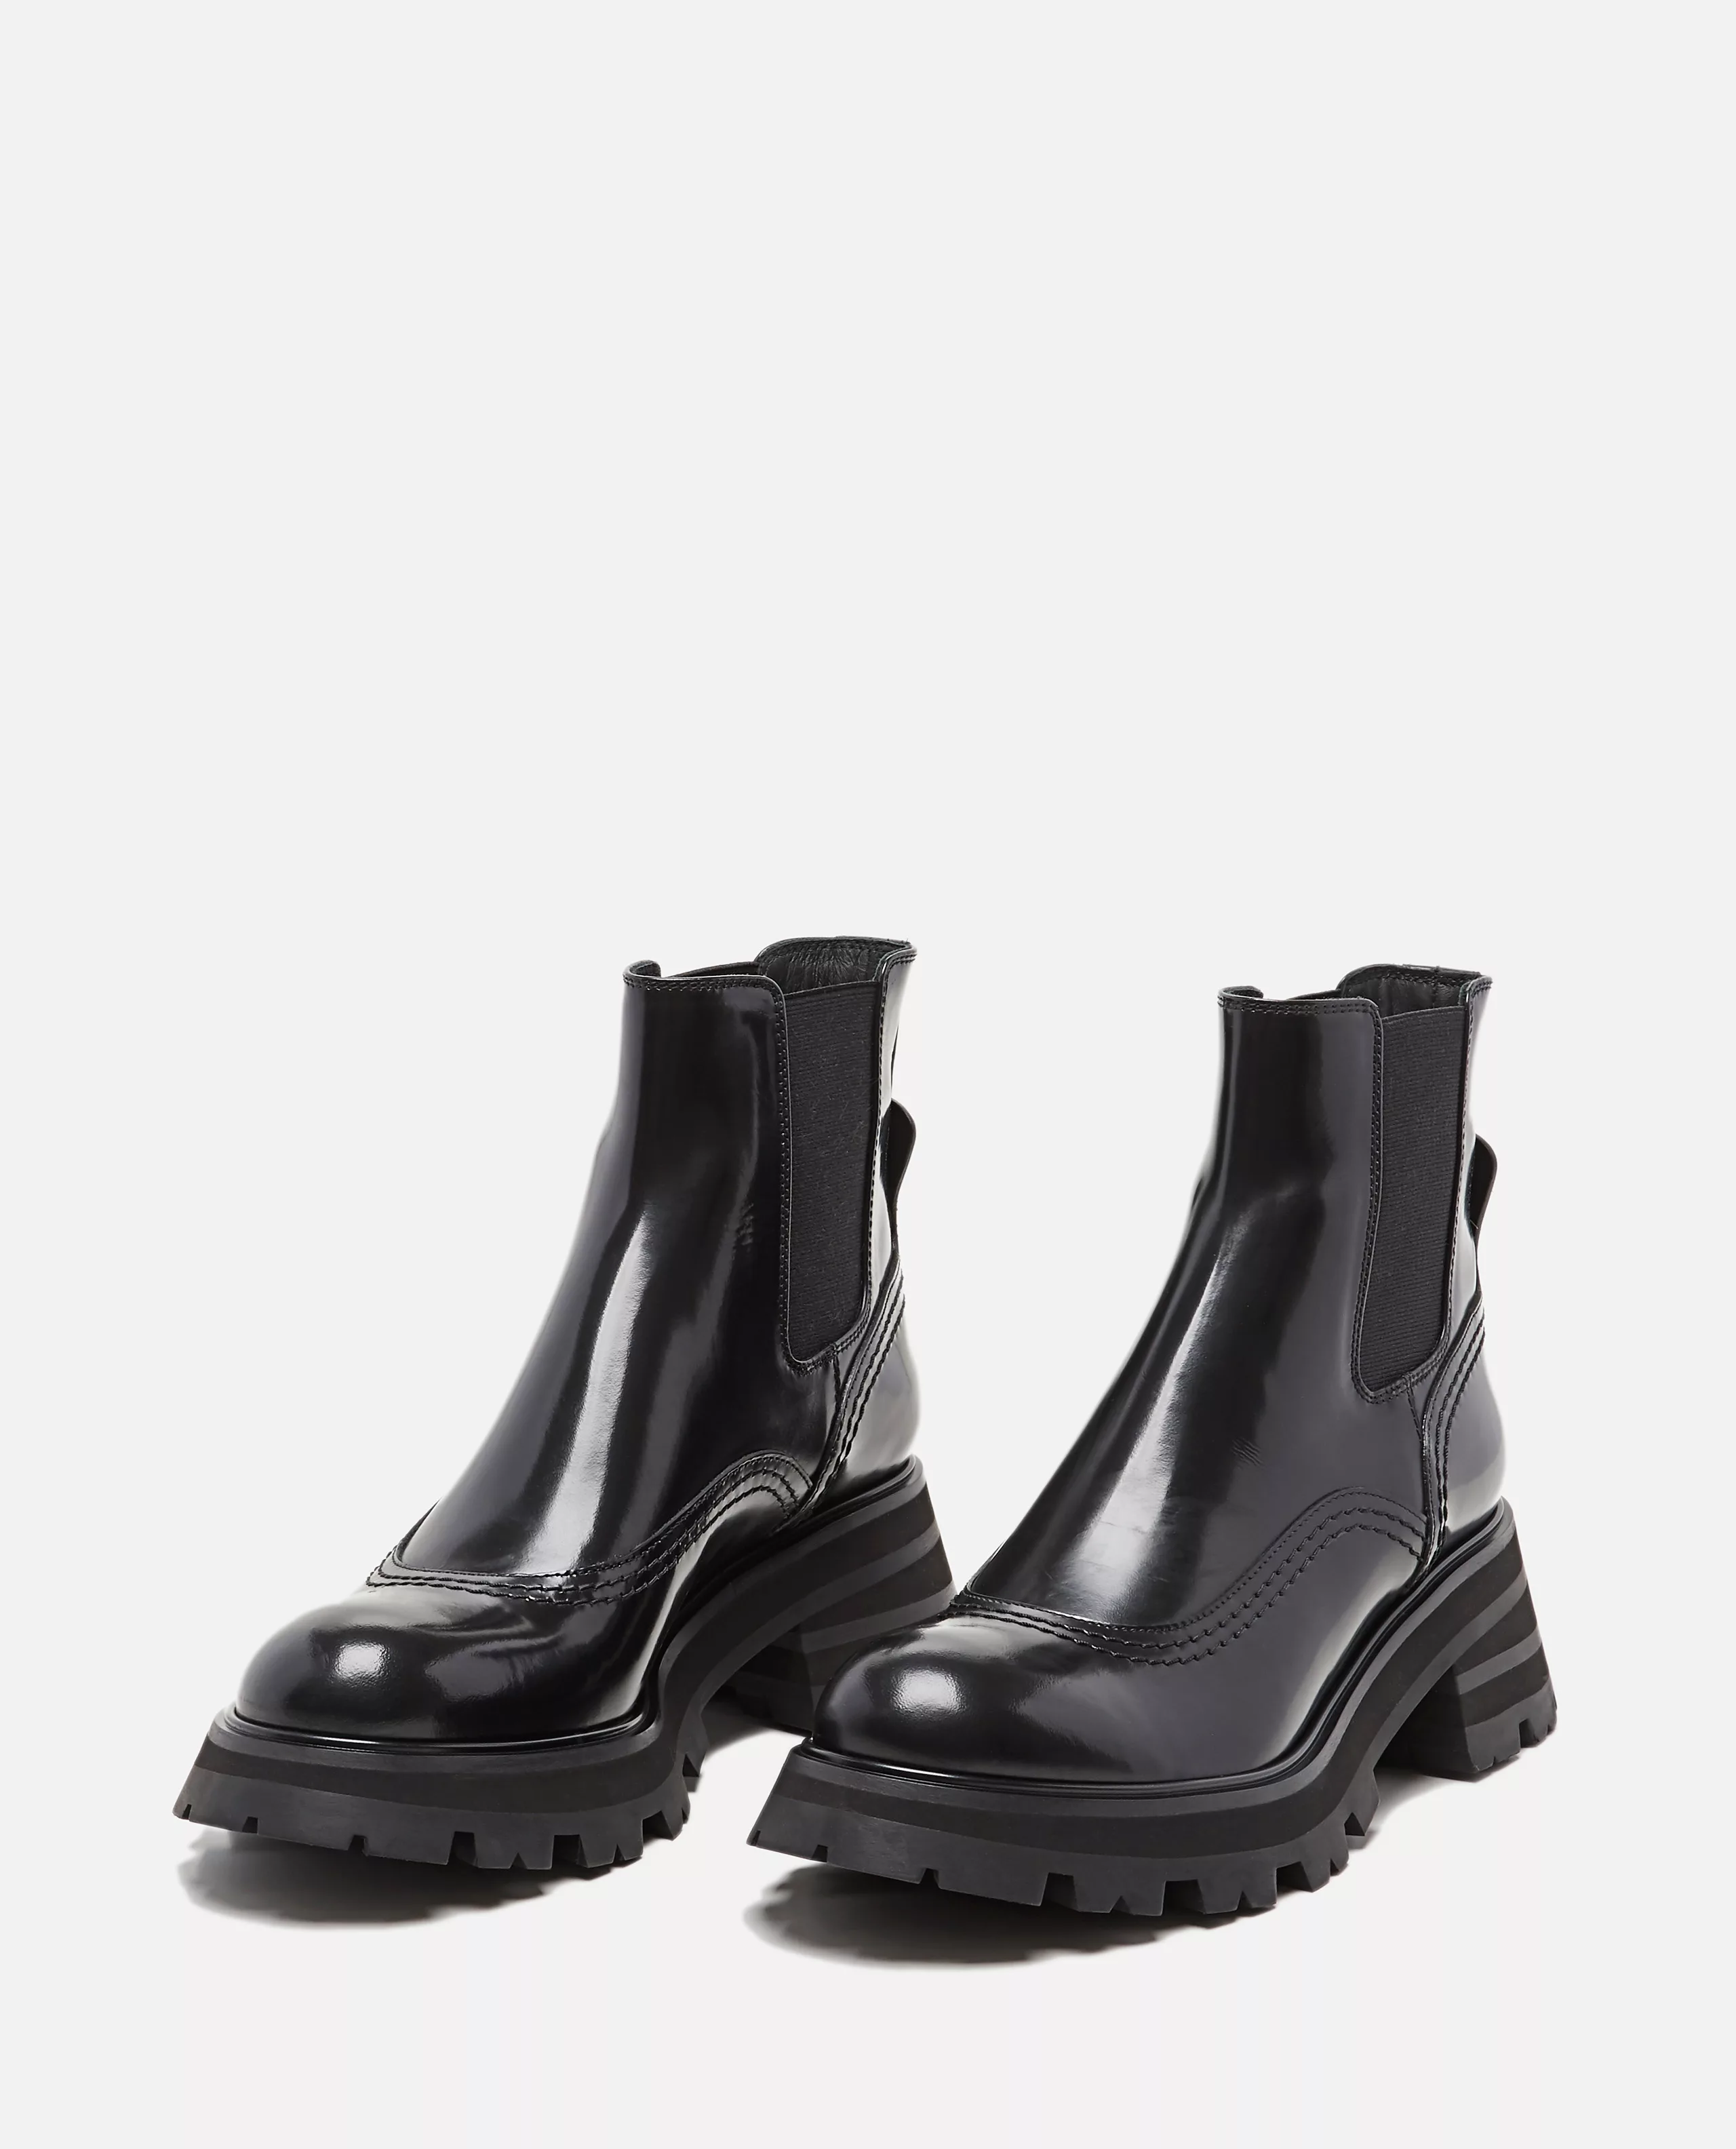 CHUNKY POLISHED LEATHER CHELSEA BOOTS günstig online kaufen